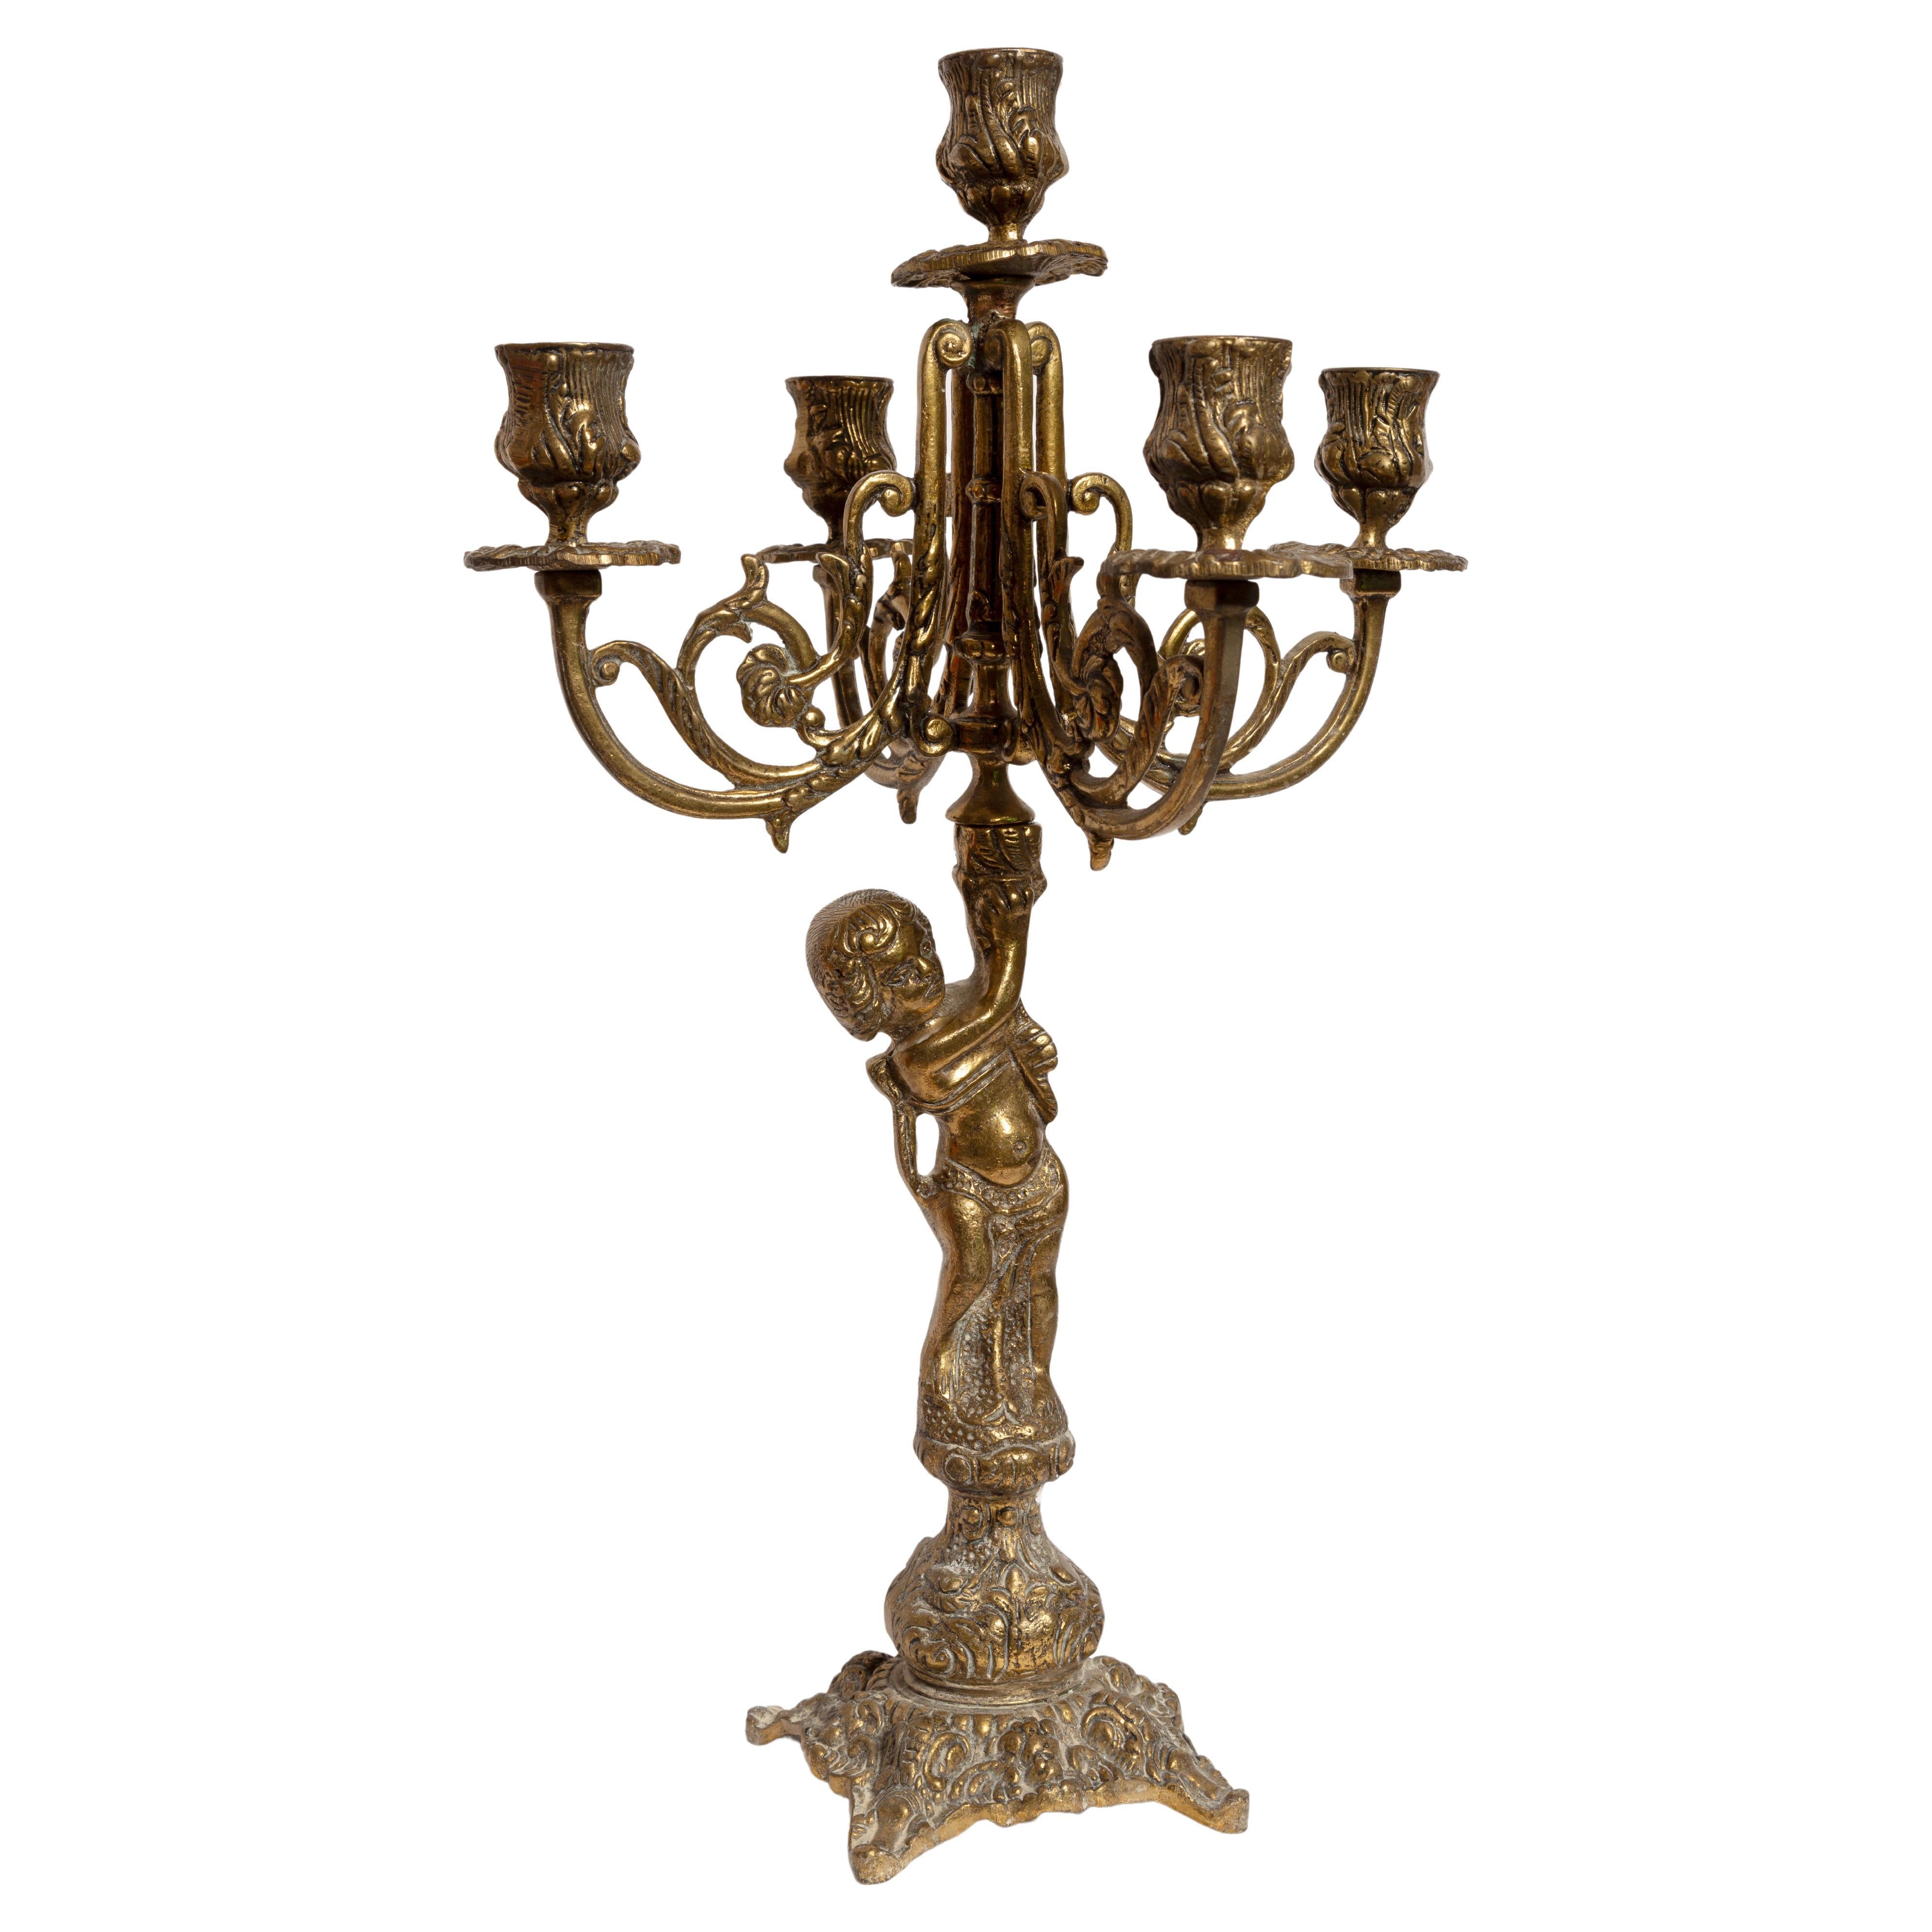 20th Century Metal Gold Brass Decorative Candlesticks with Angel, Italy, 1960s For Sale